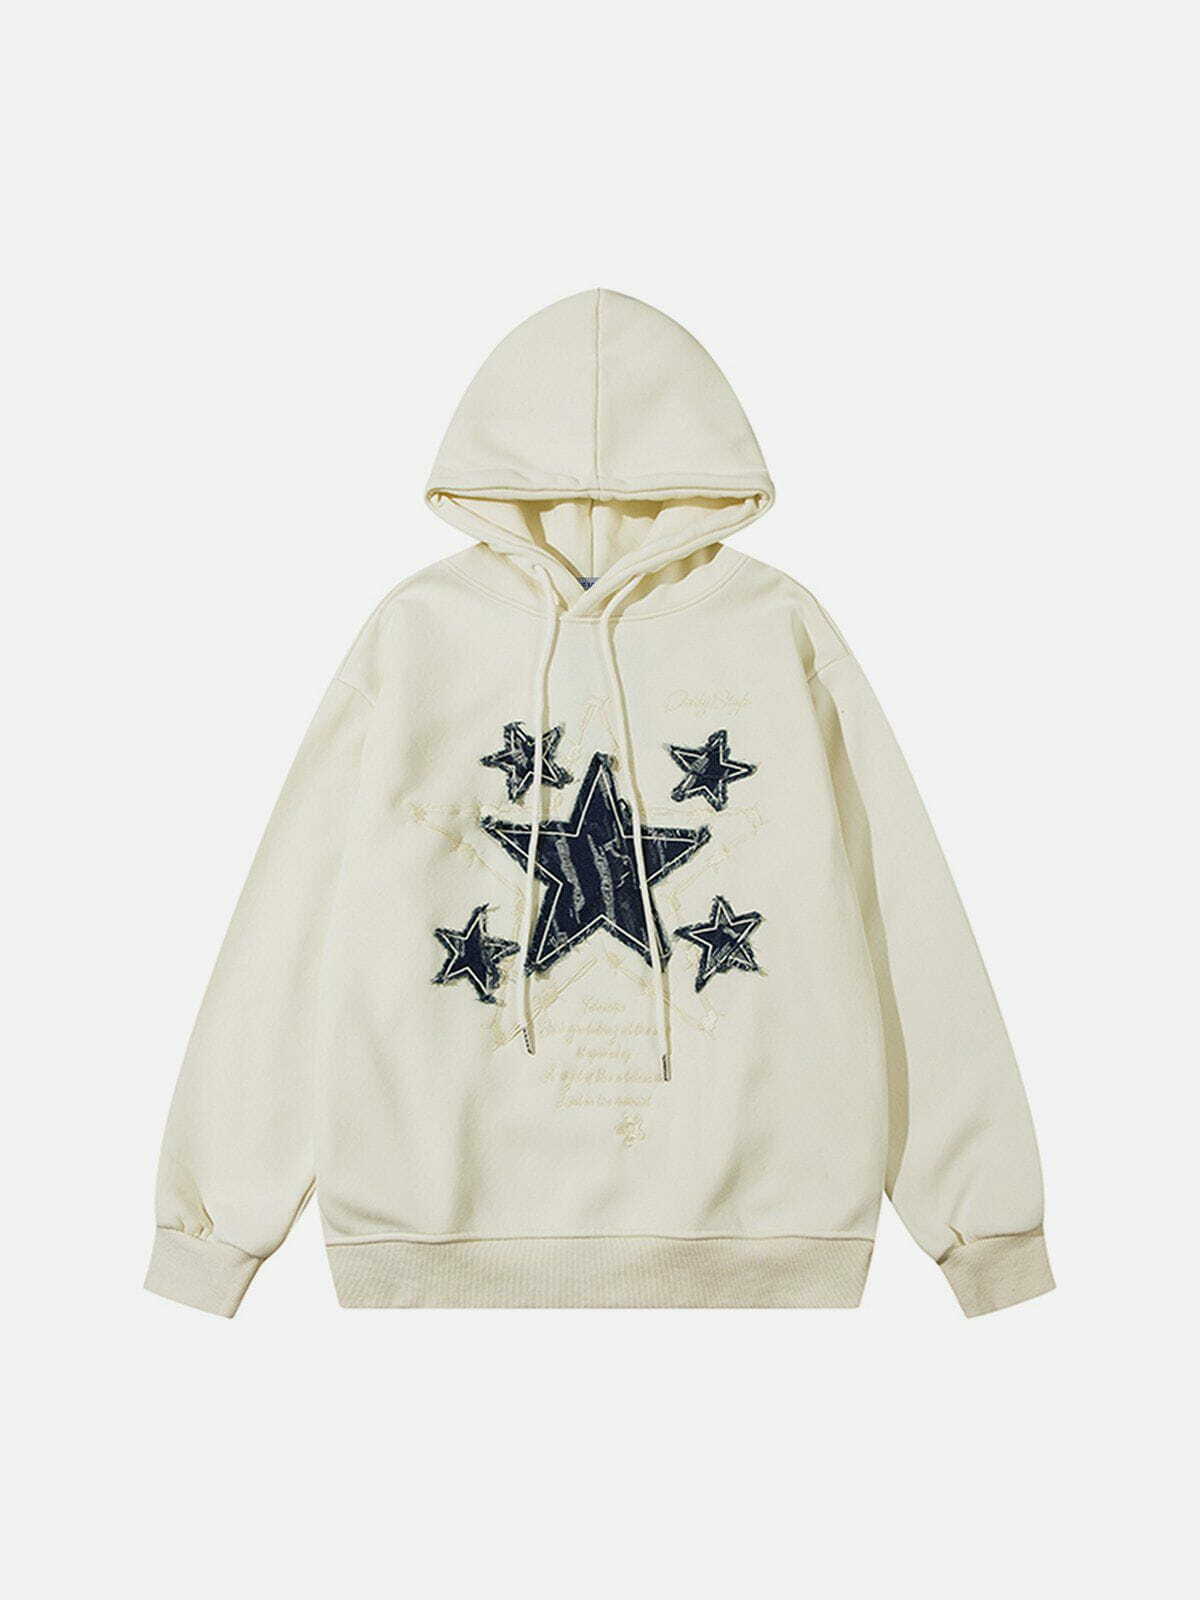 star applique embroidered hoodie edgy streetwear statement 6803